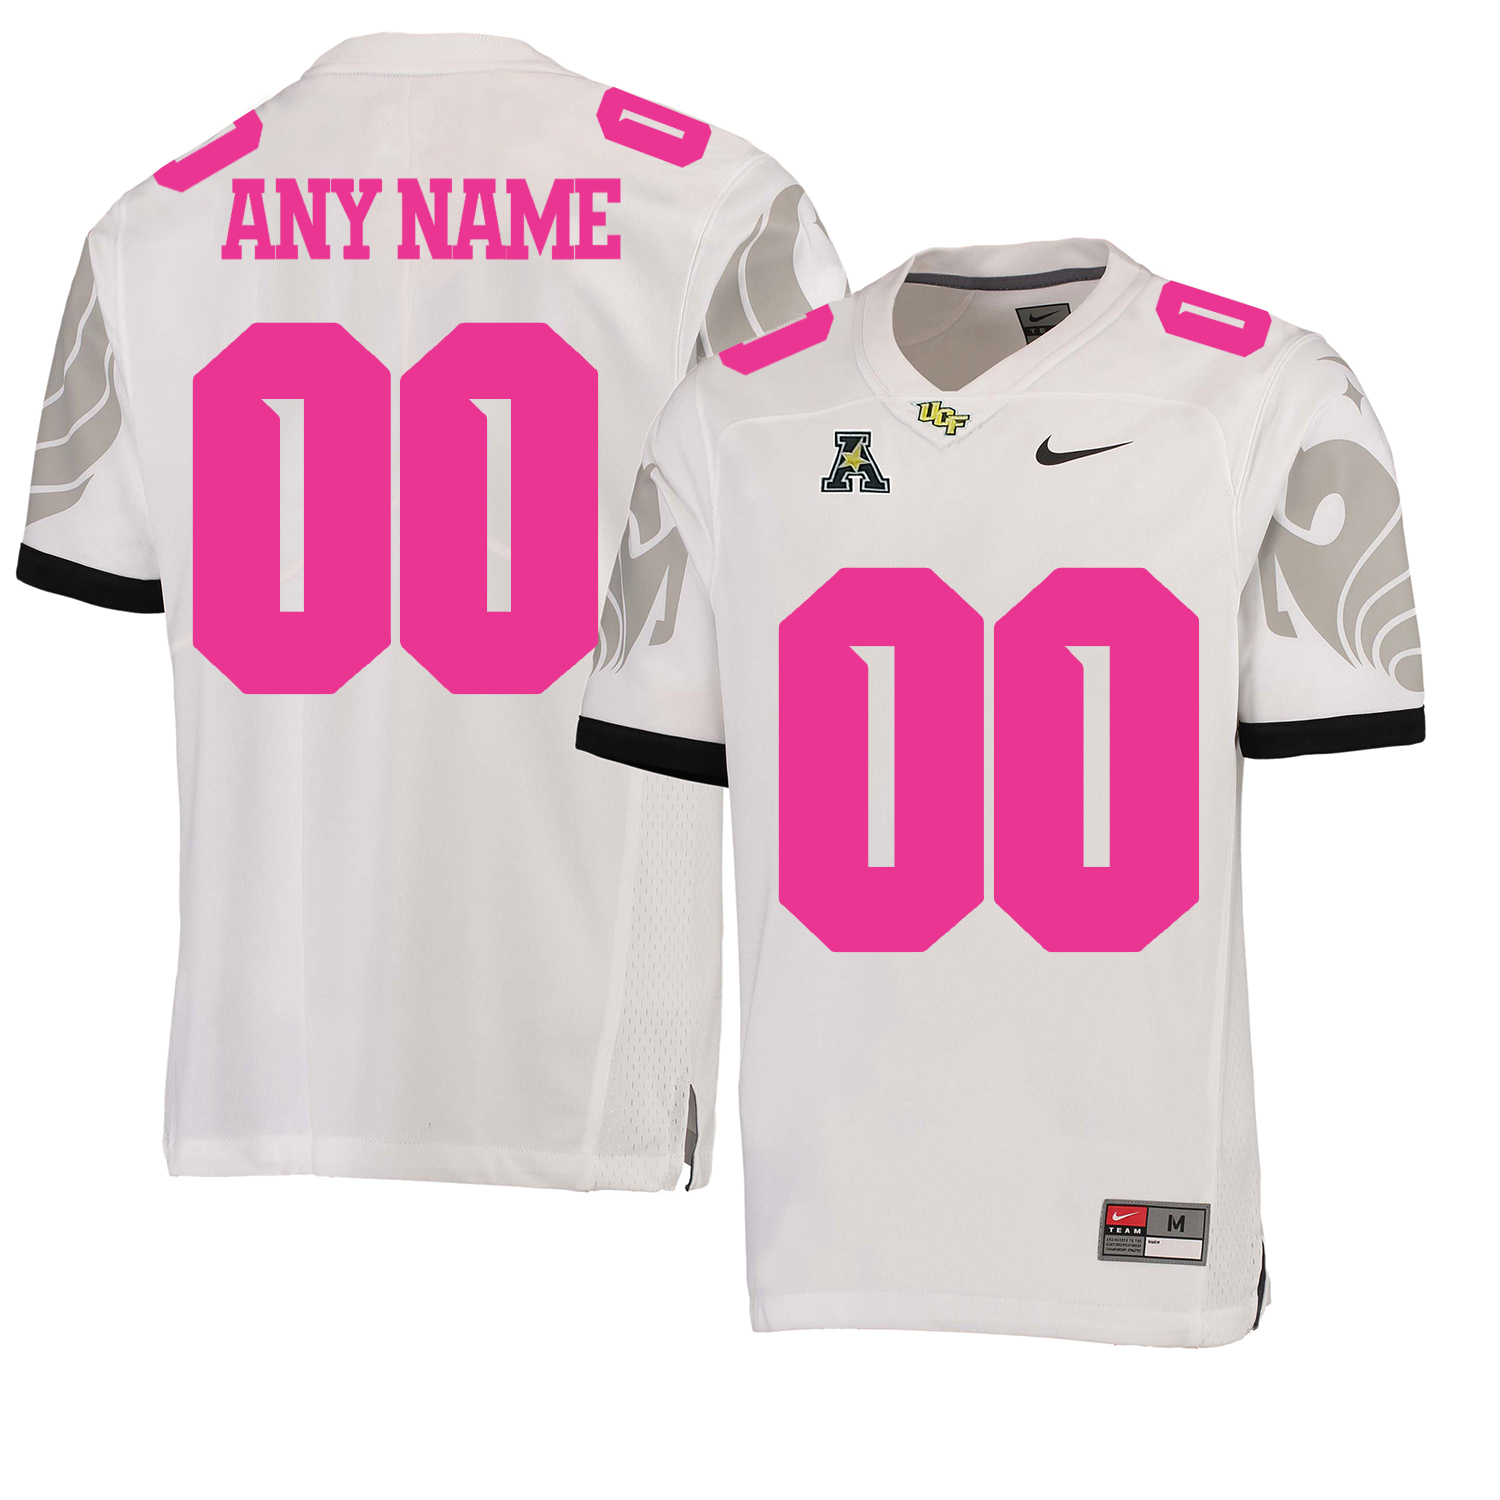 UCF Knights White 2018 Breast Cancer Awareness Men's Customized College Football Jersey